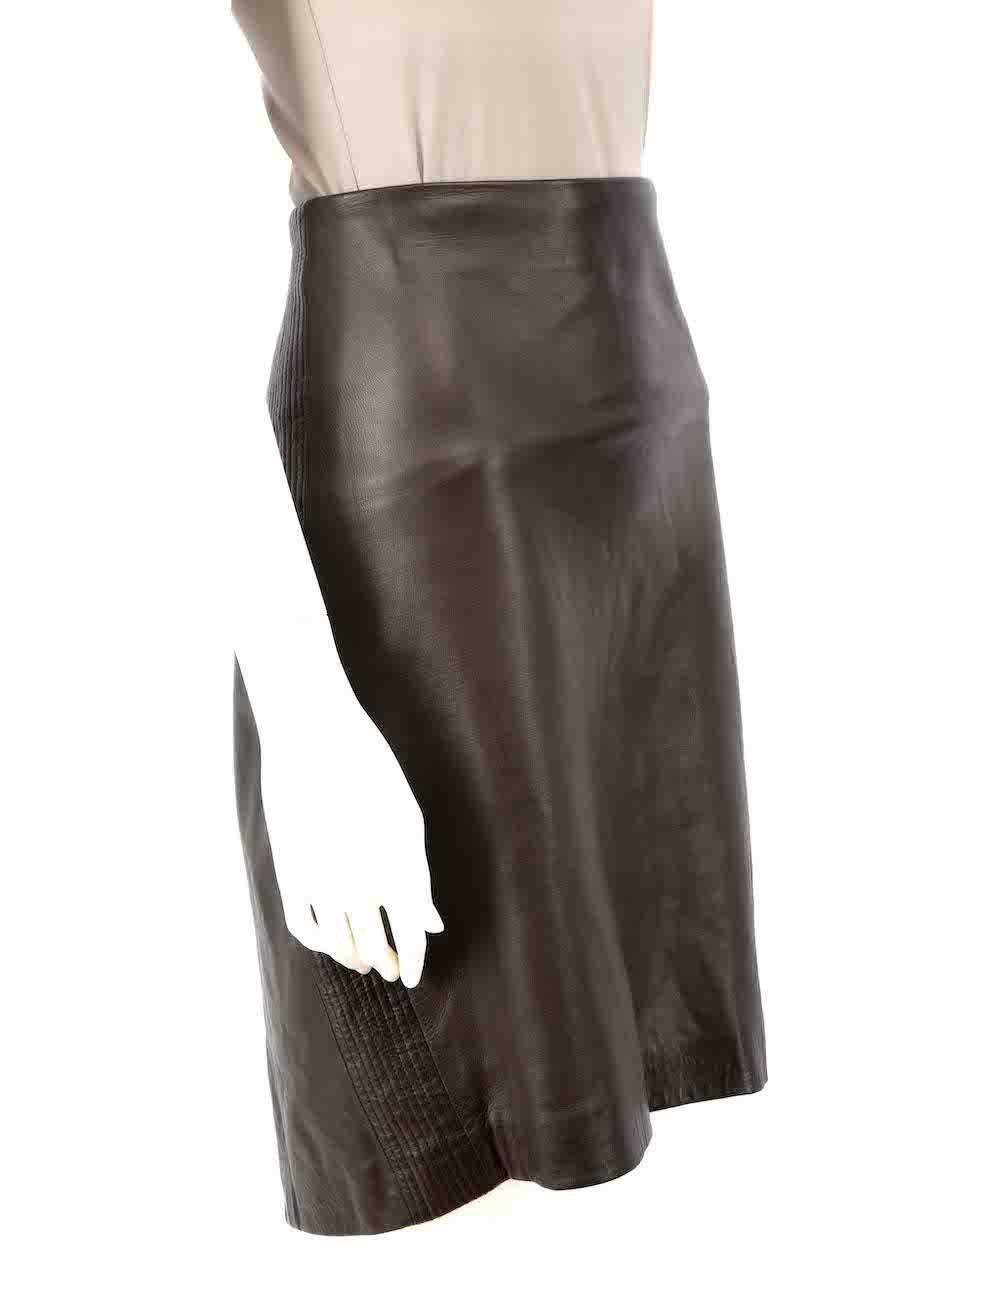 CONDITION is Very good. Minimal wear to skirt is evident. Minimal wear to the centre-back zip fastening with slight splitting of the base of the seam on this used Jil Sander designer resale item.
 
 Details
 Brown
 Leather
 Straight skirt
 Back and